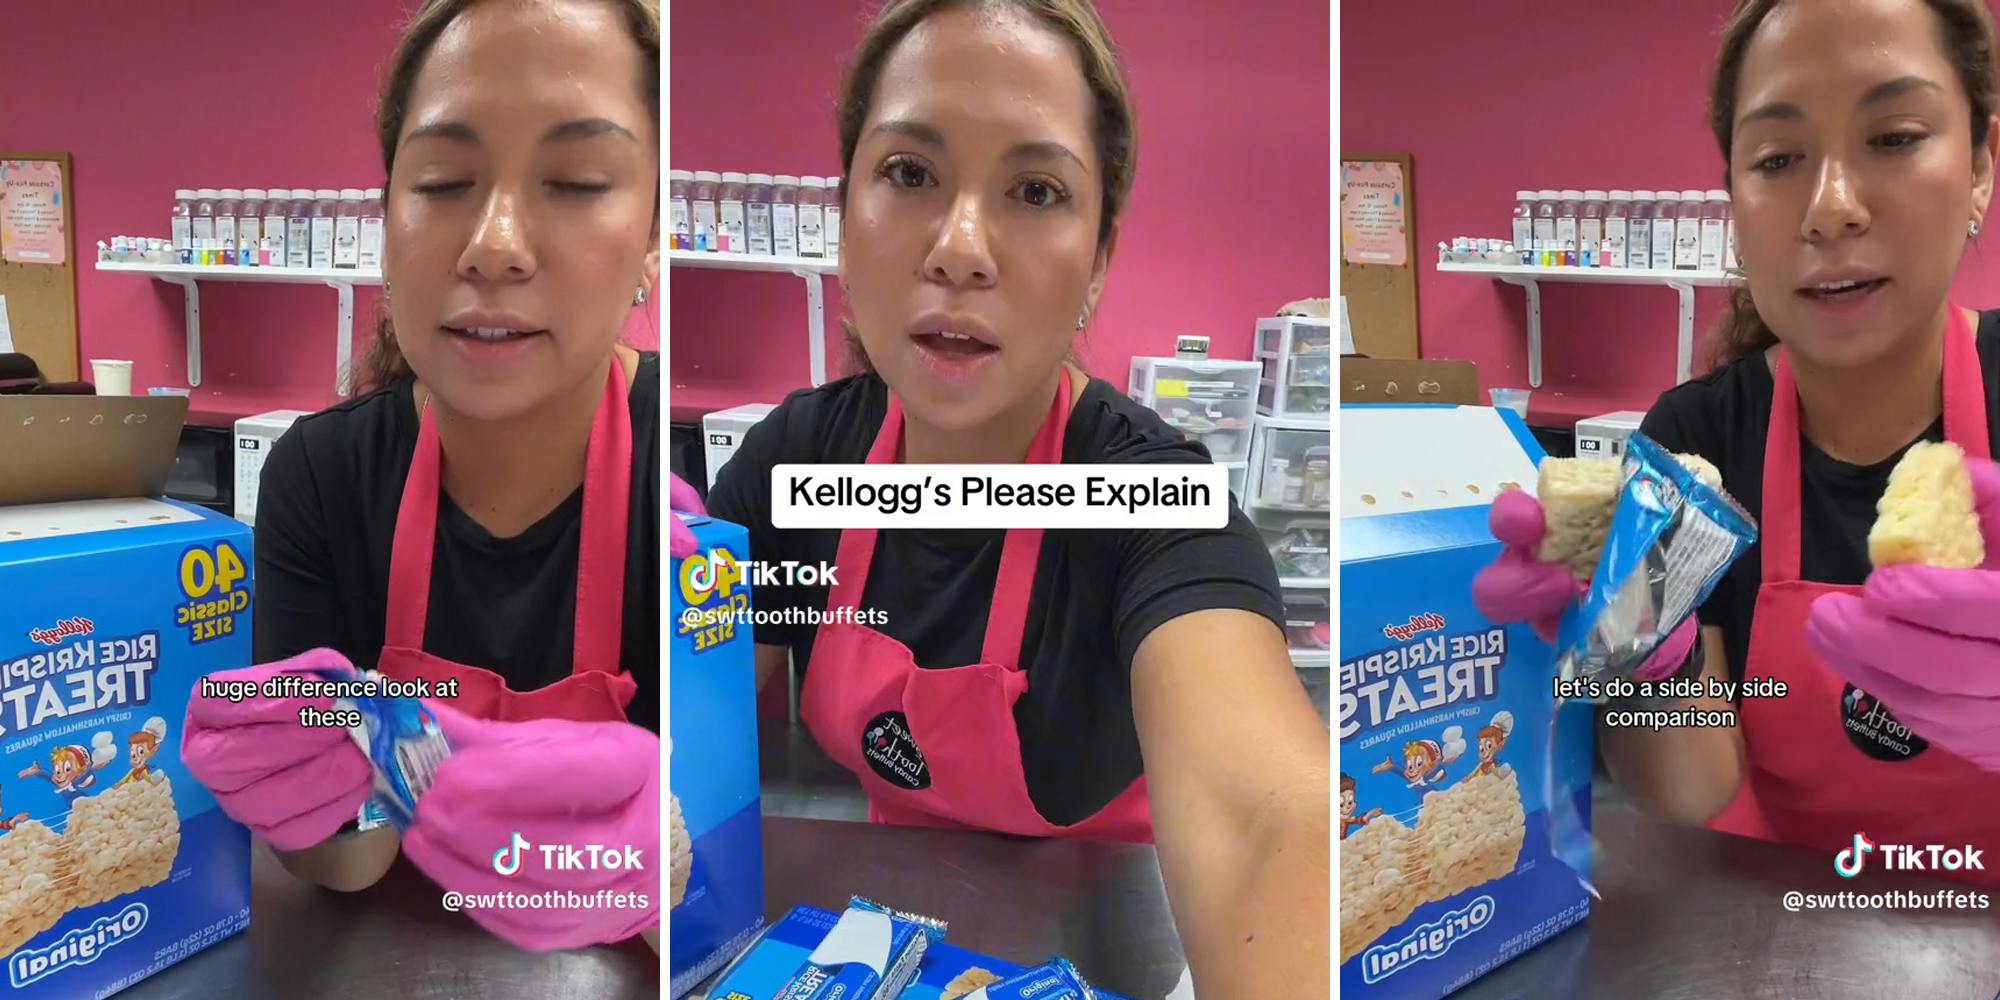 woman holding rice krispie treats with caption "huge difference look at these" (l) woman with caption "Kellogg's please explain" (c) woman holding rice krispie treats with caption "let's do a side by side comparison" (r)